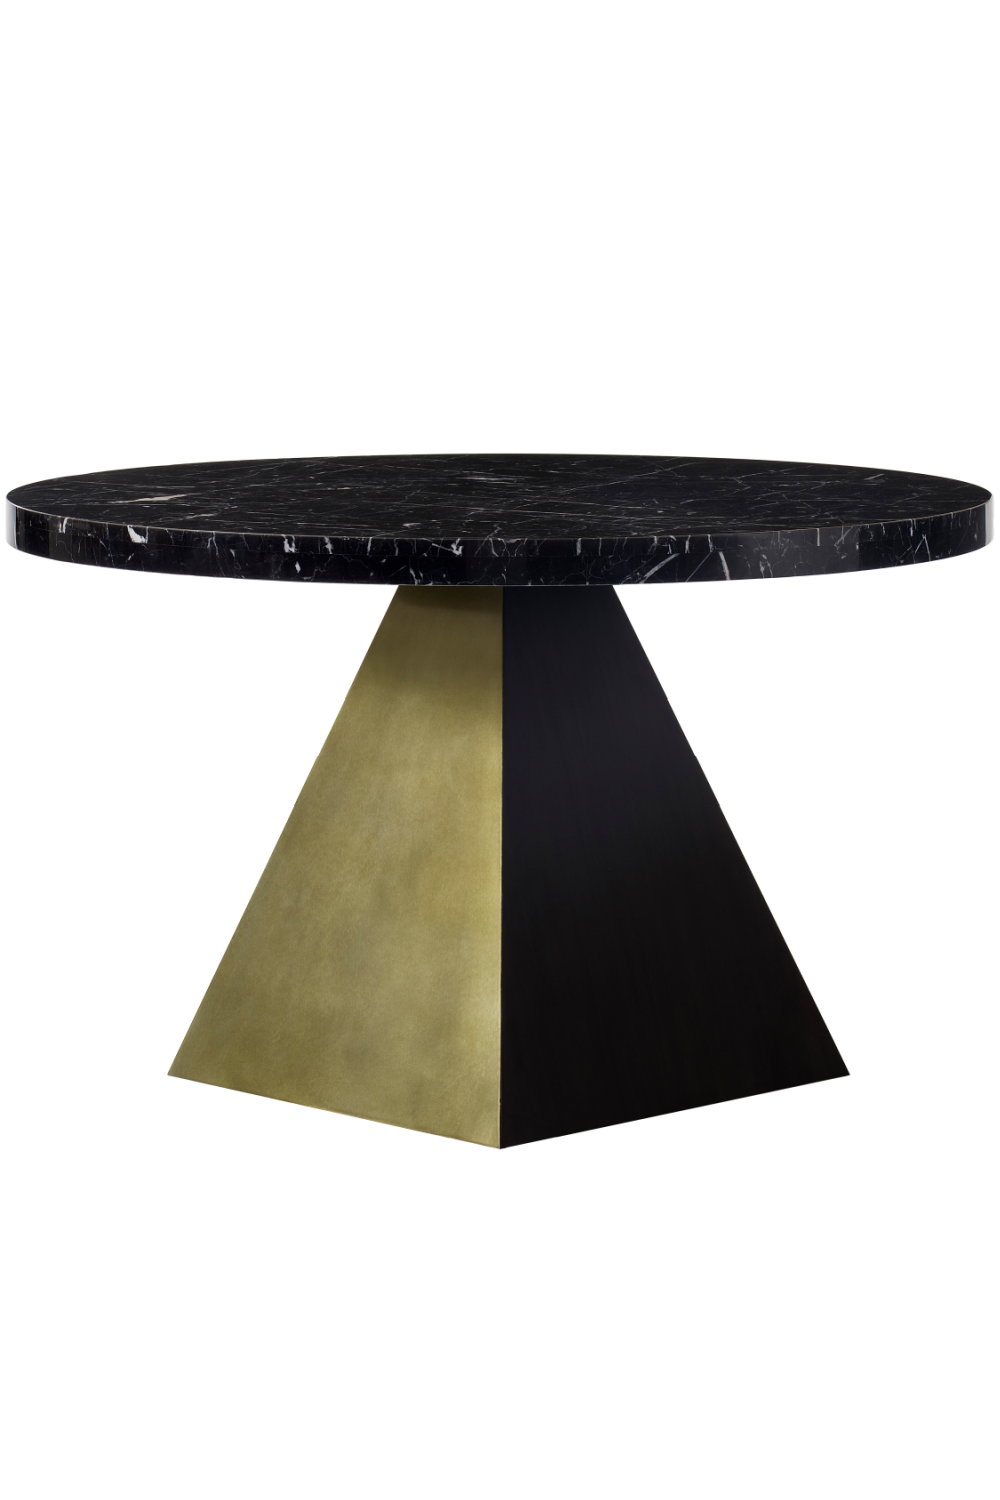 Black Marble Pyramid Base Dining Table L | Andrew Martin Louis | OROA